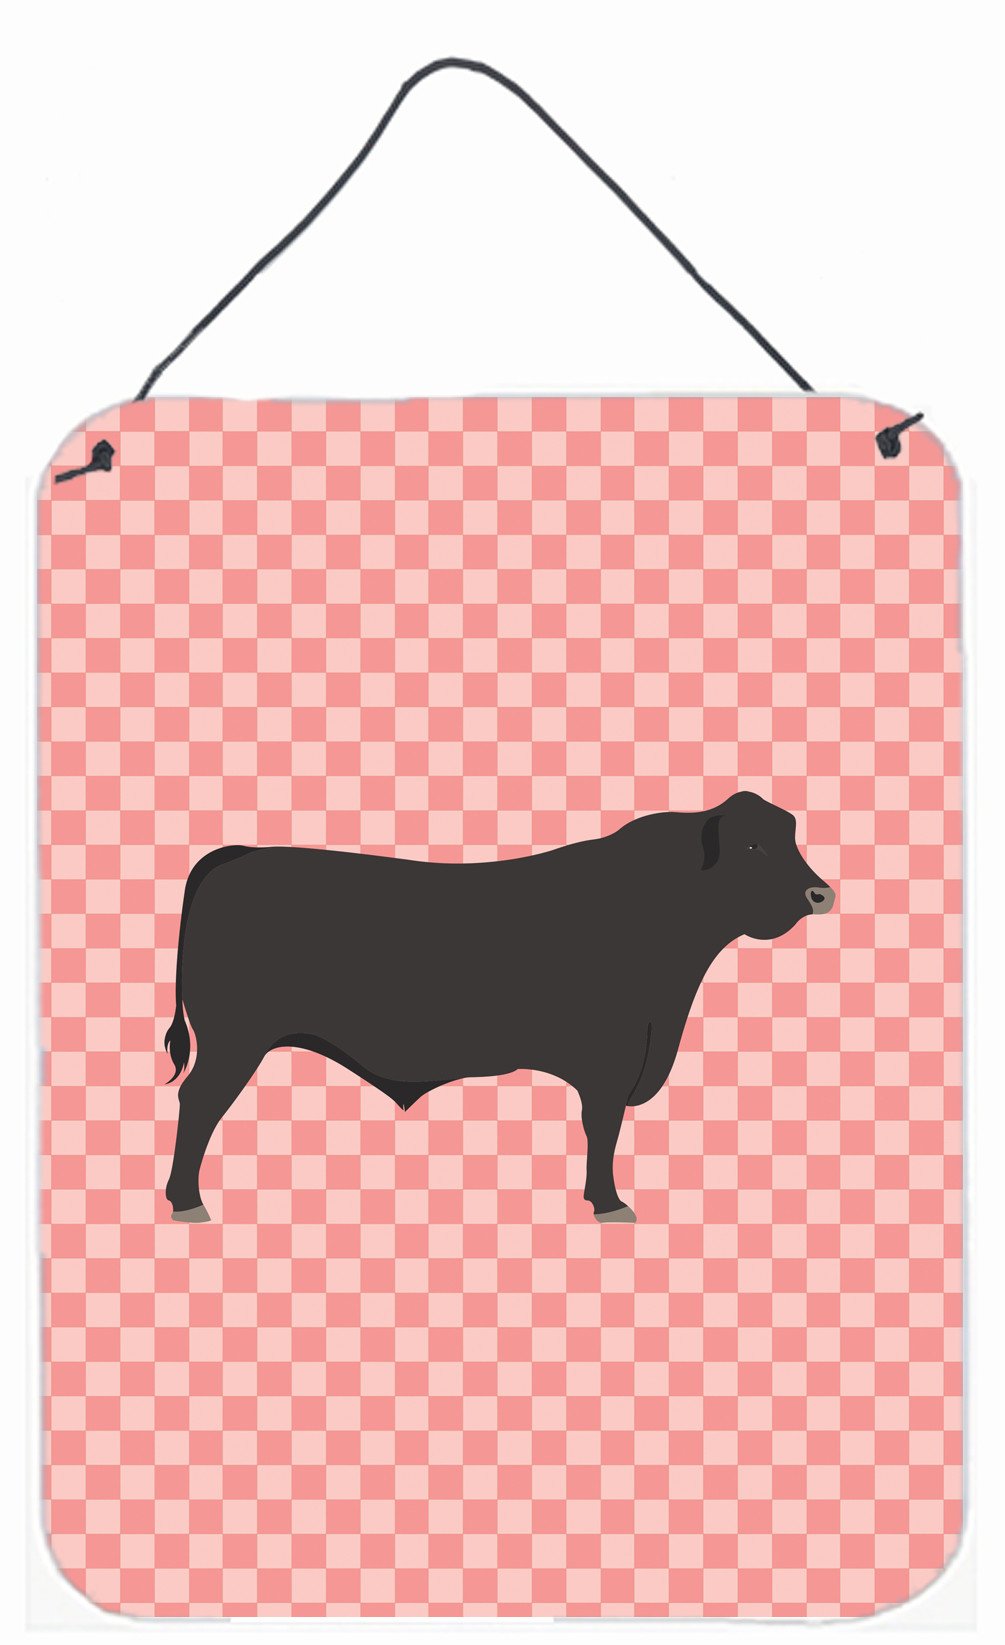 Black Angus Cow Pink Check Wall or Door Hanging Prints BB7828DS1216 by Caroline's Treasures